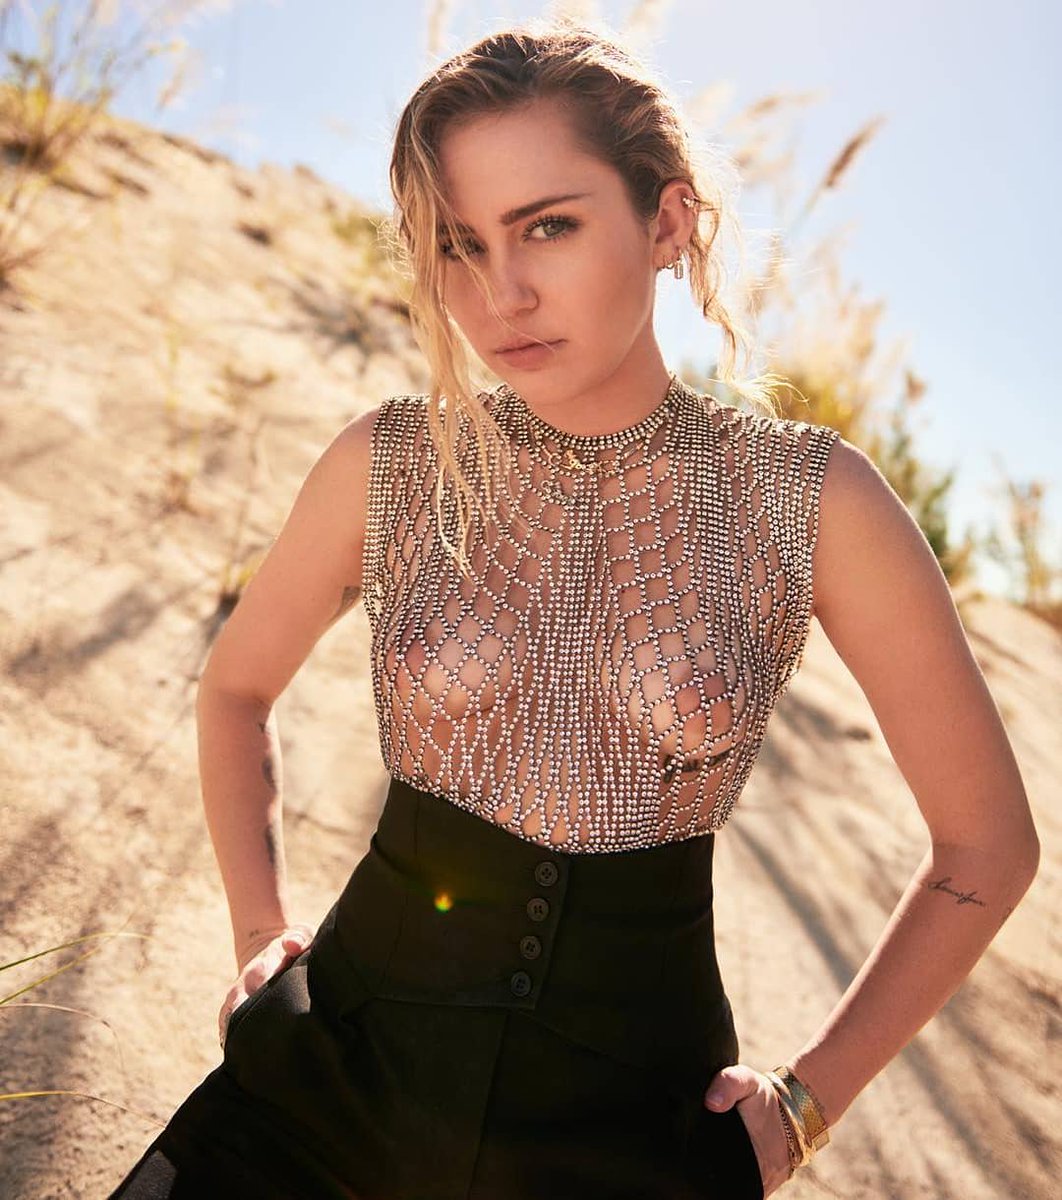 Miley Cyrus Sexy Images photo 15